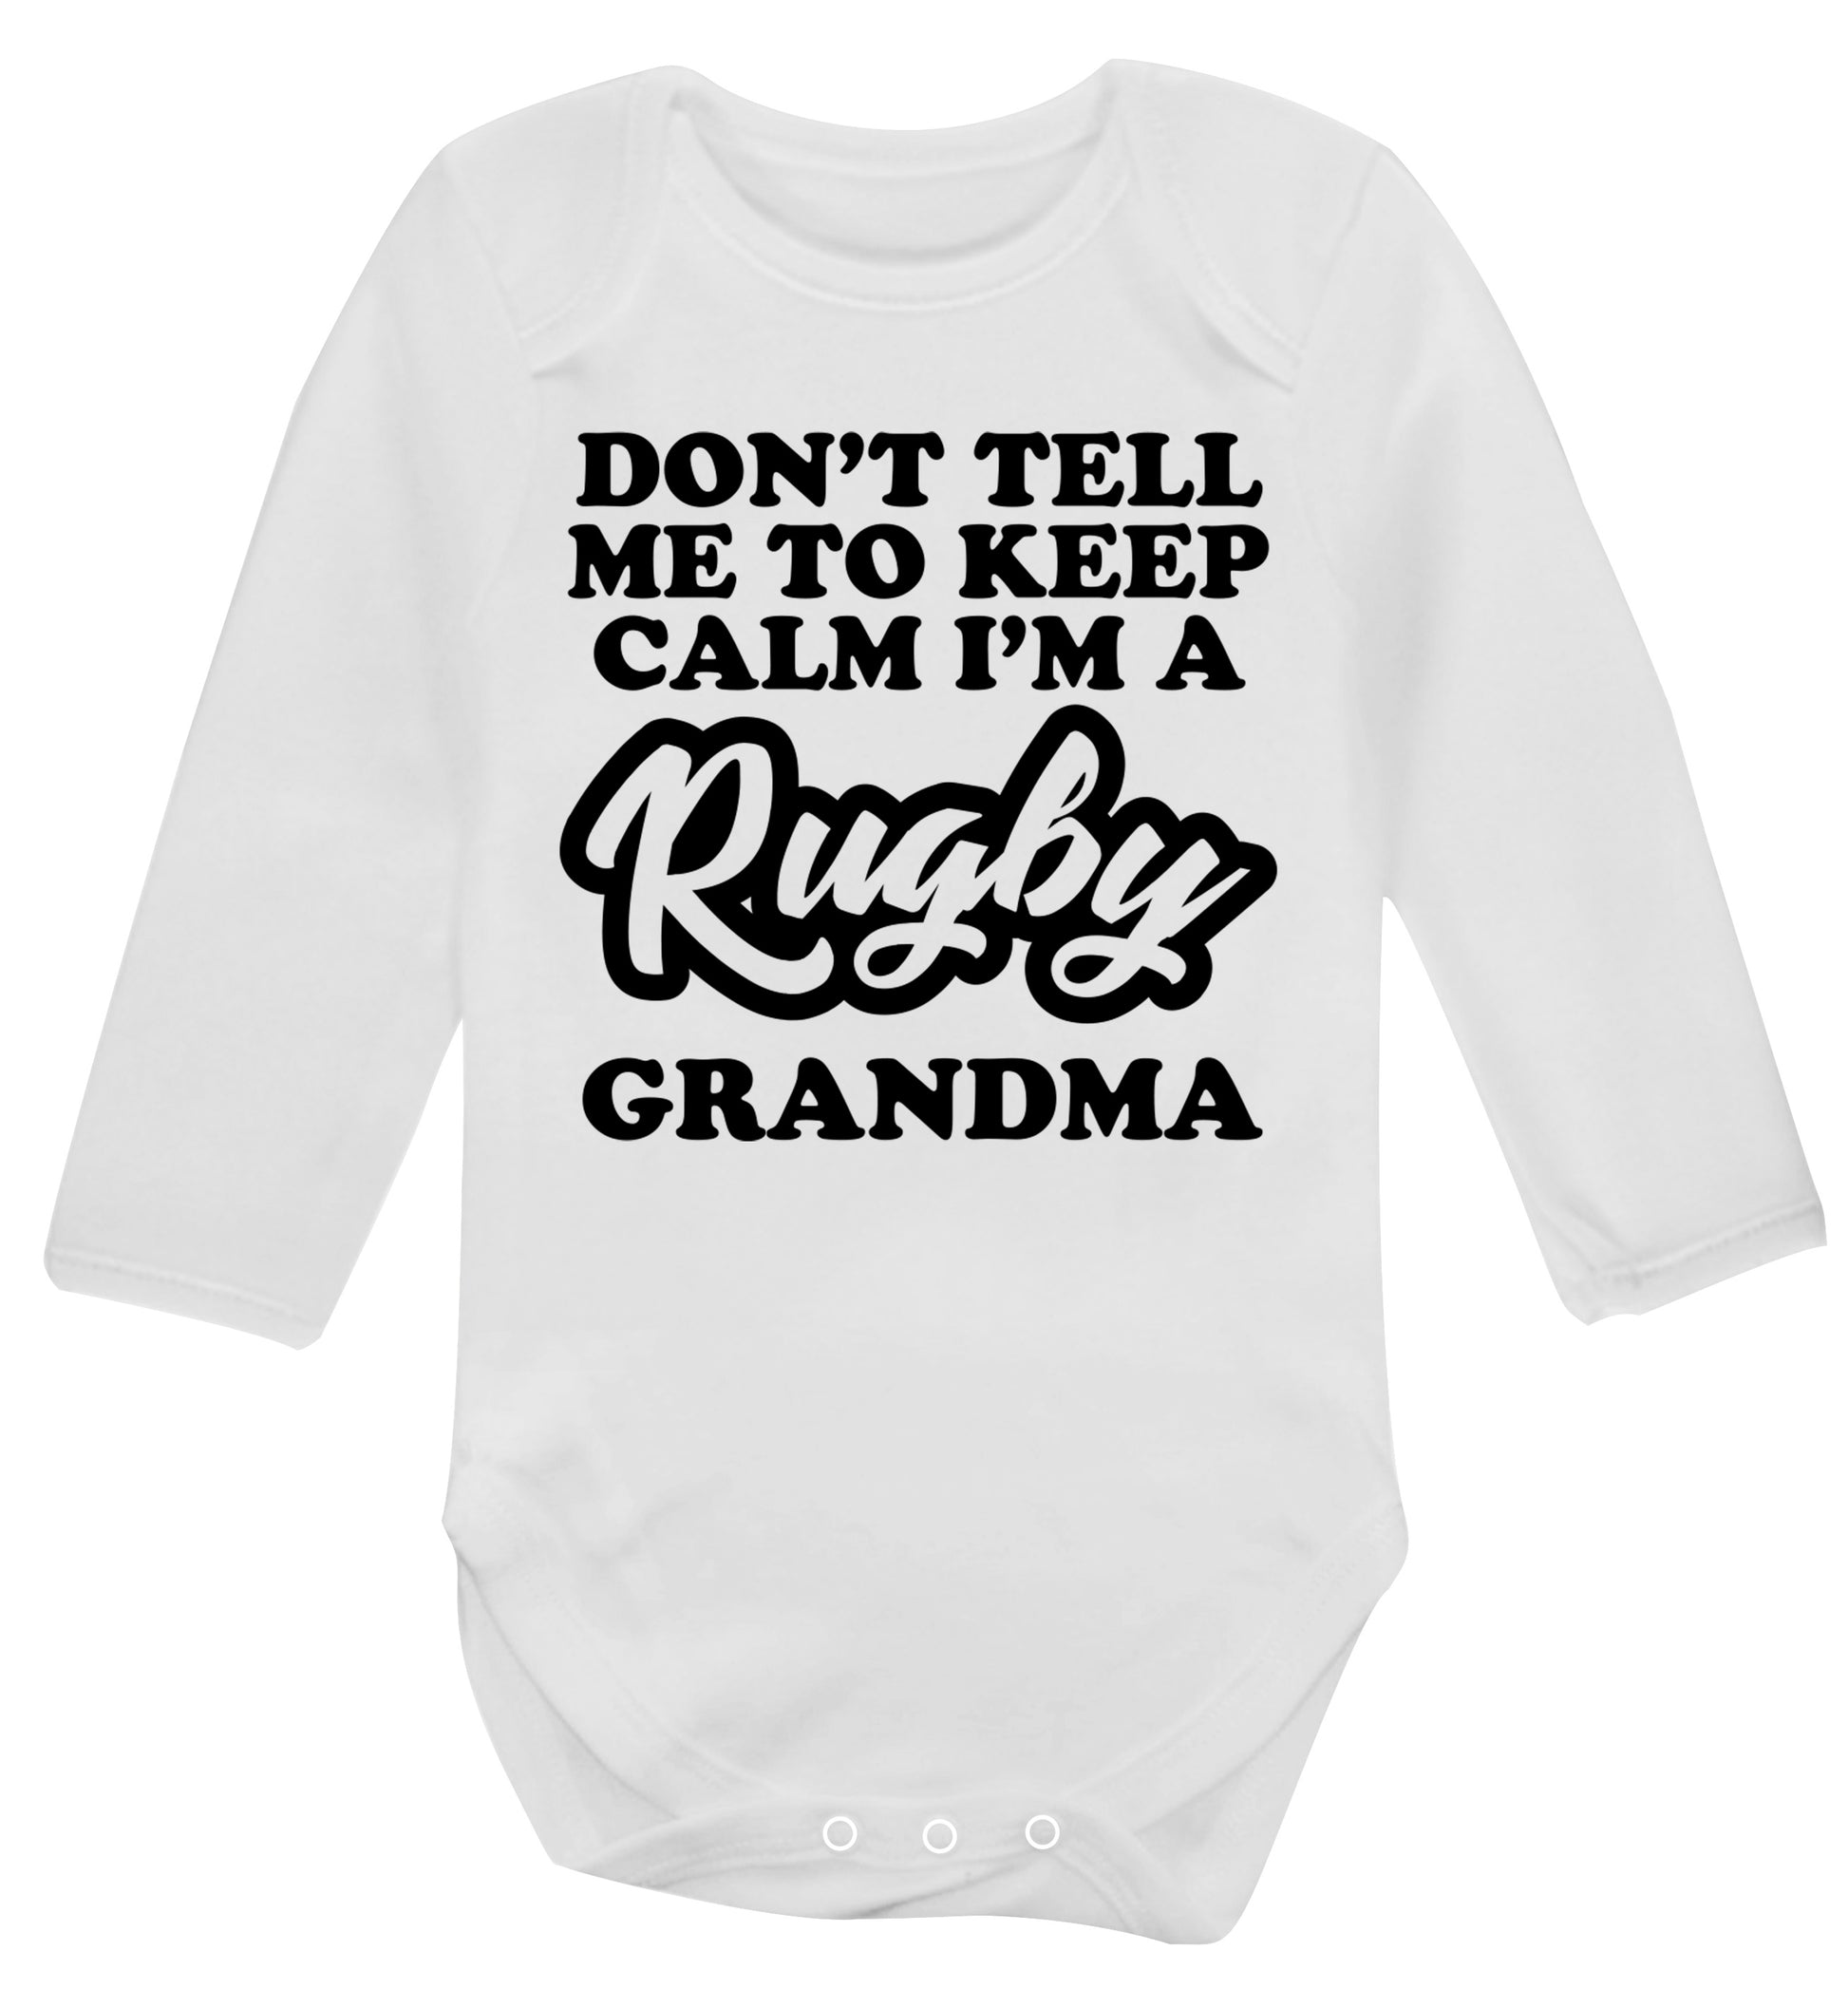 Don't tell me to keep calm I'm a rugby grandma Baby Vest long sleeved white 6-12 months